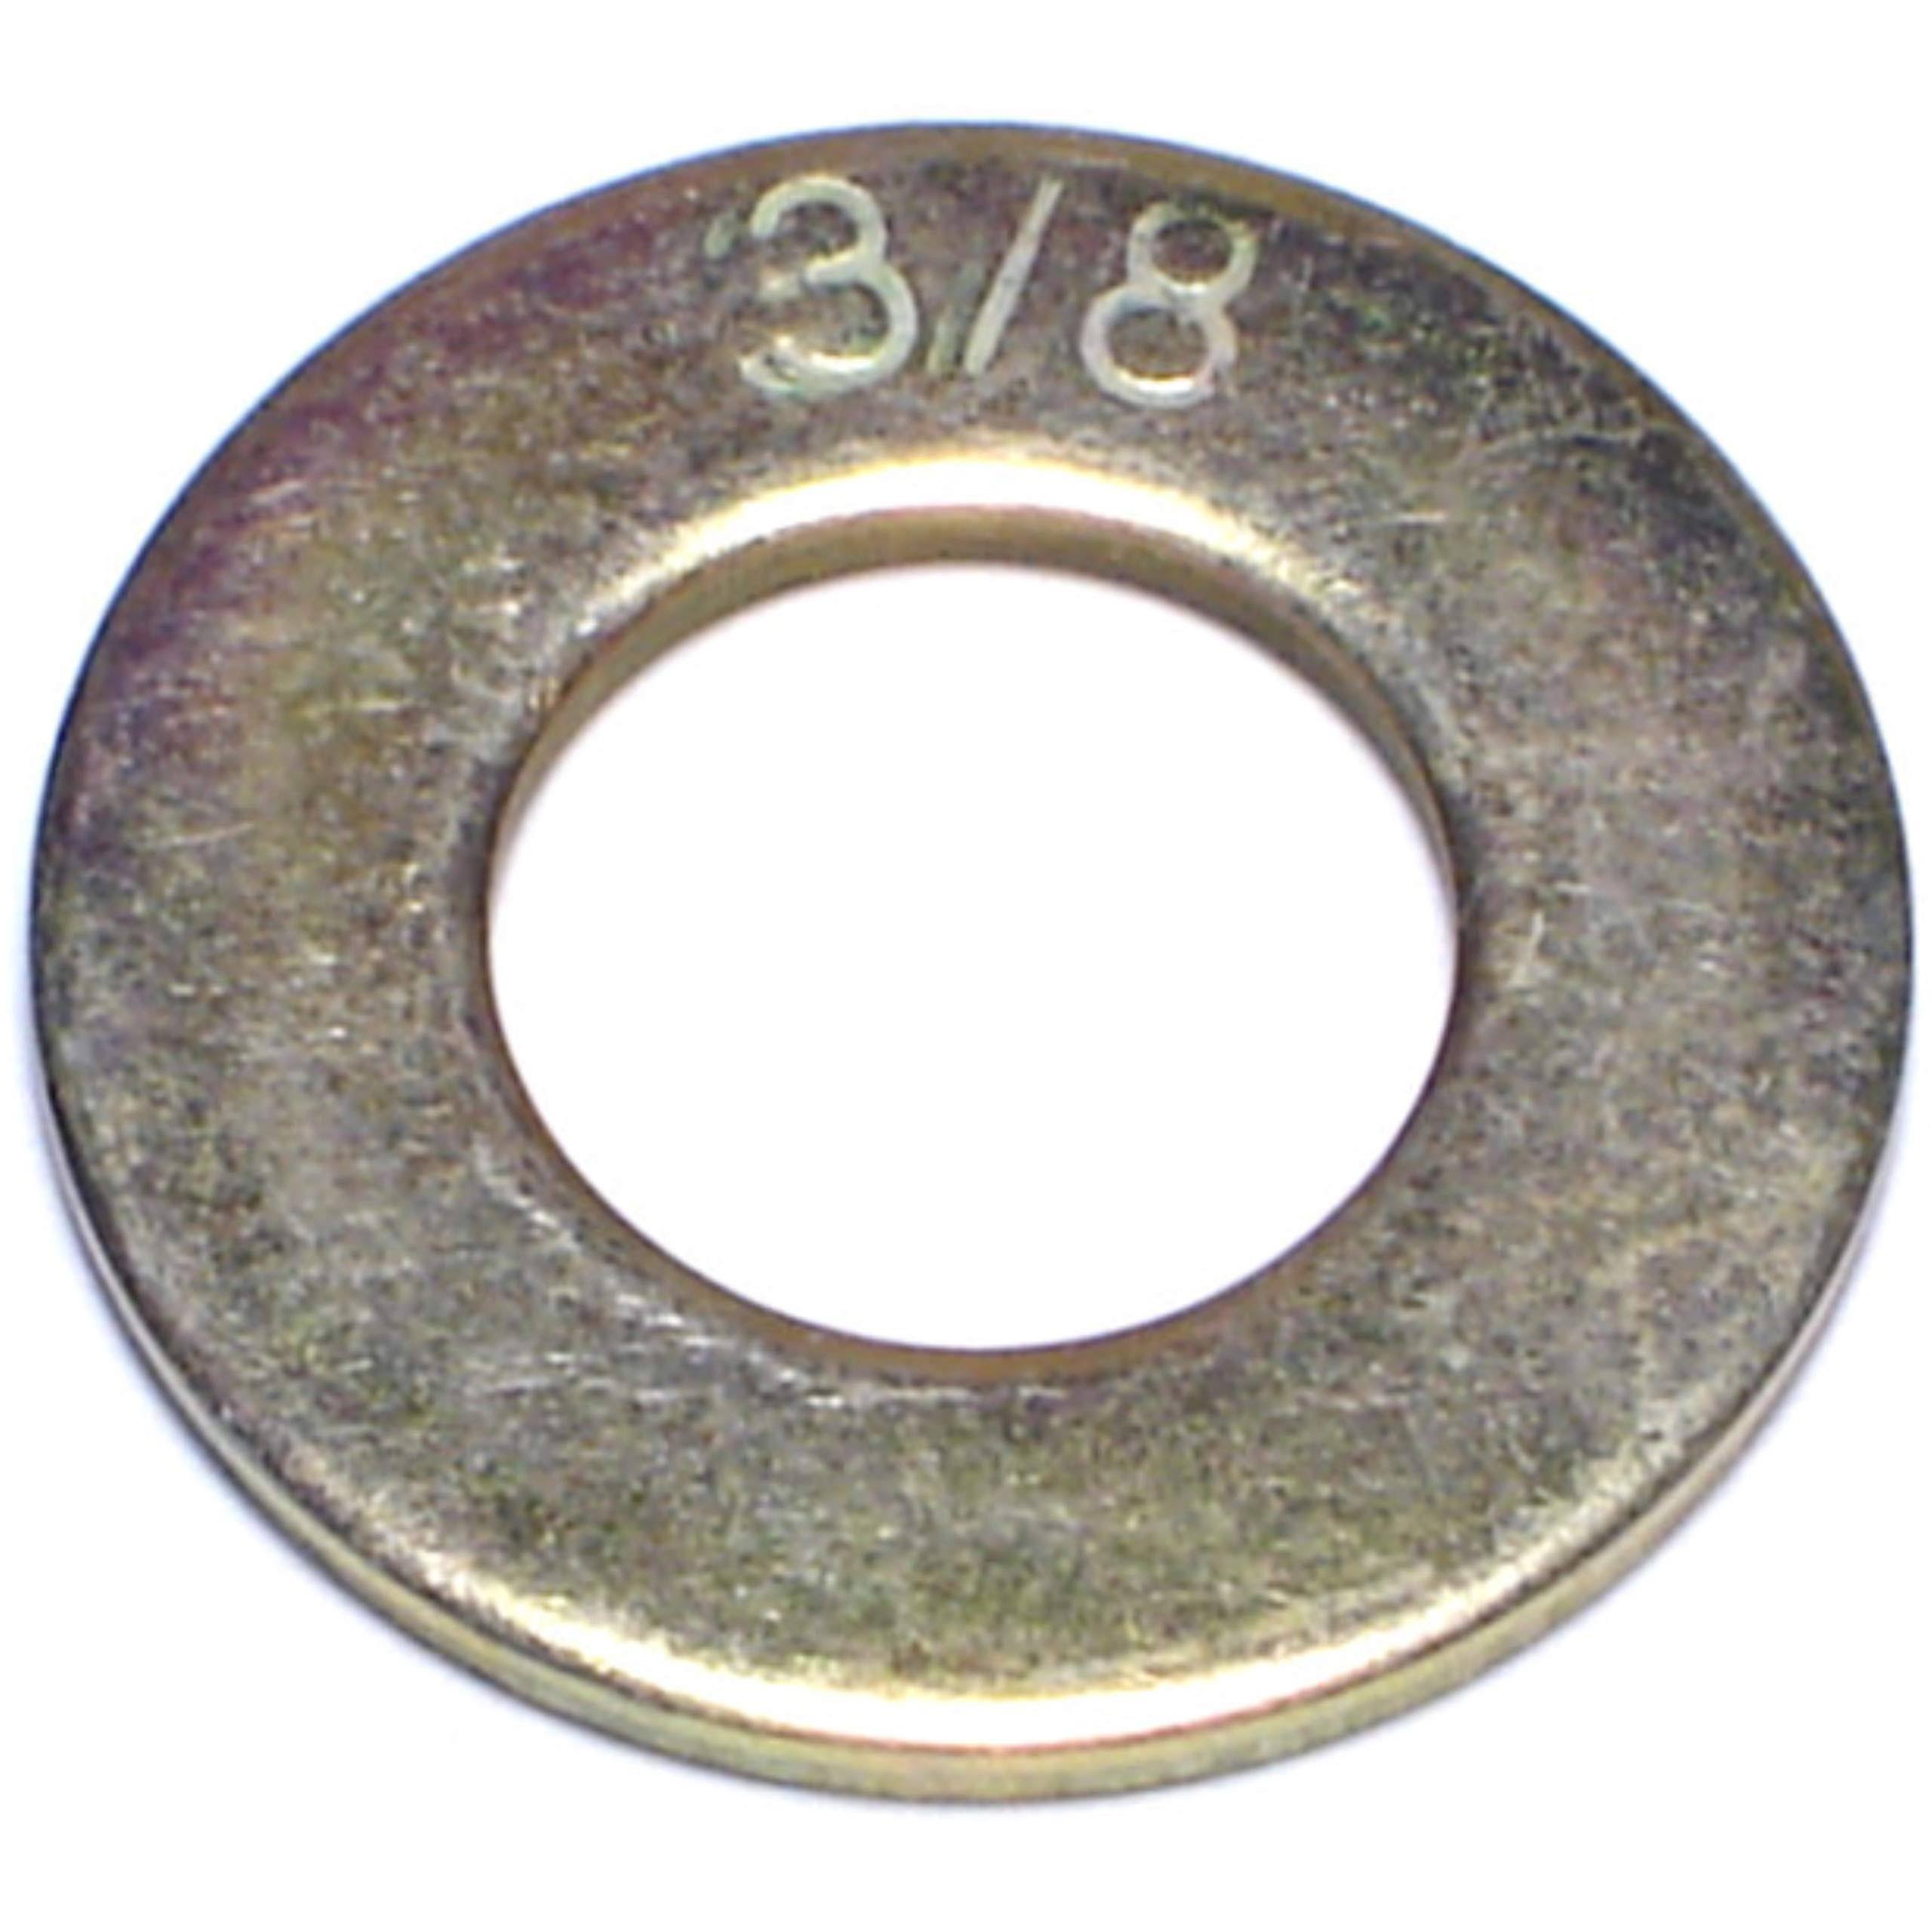 Midwest Fastener Sae Flat Washers - Grade 8, 3/8", 50ct